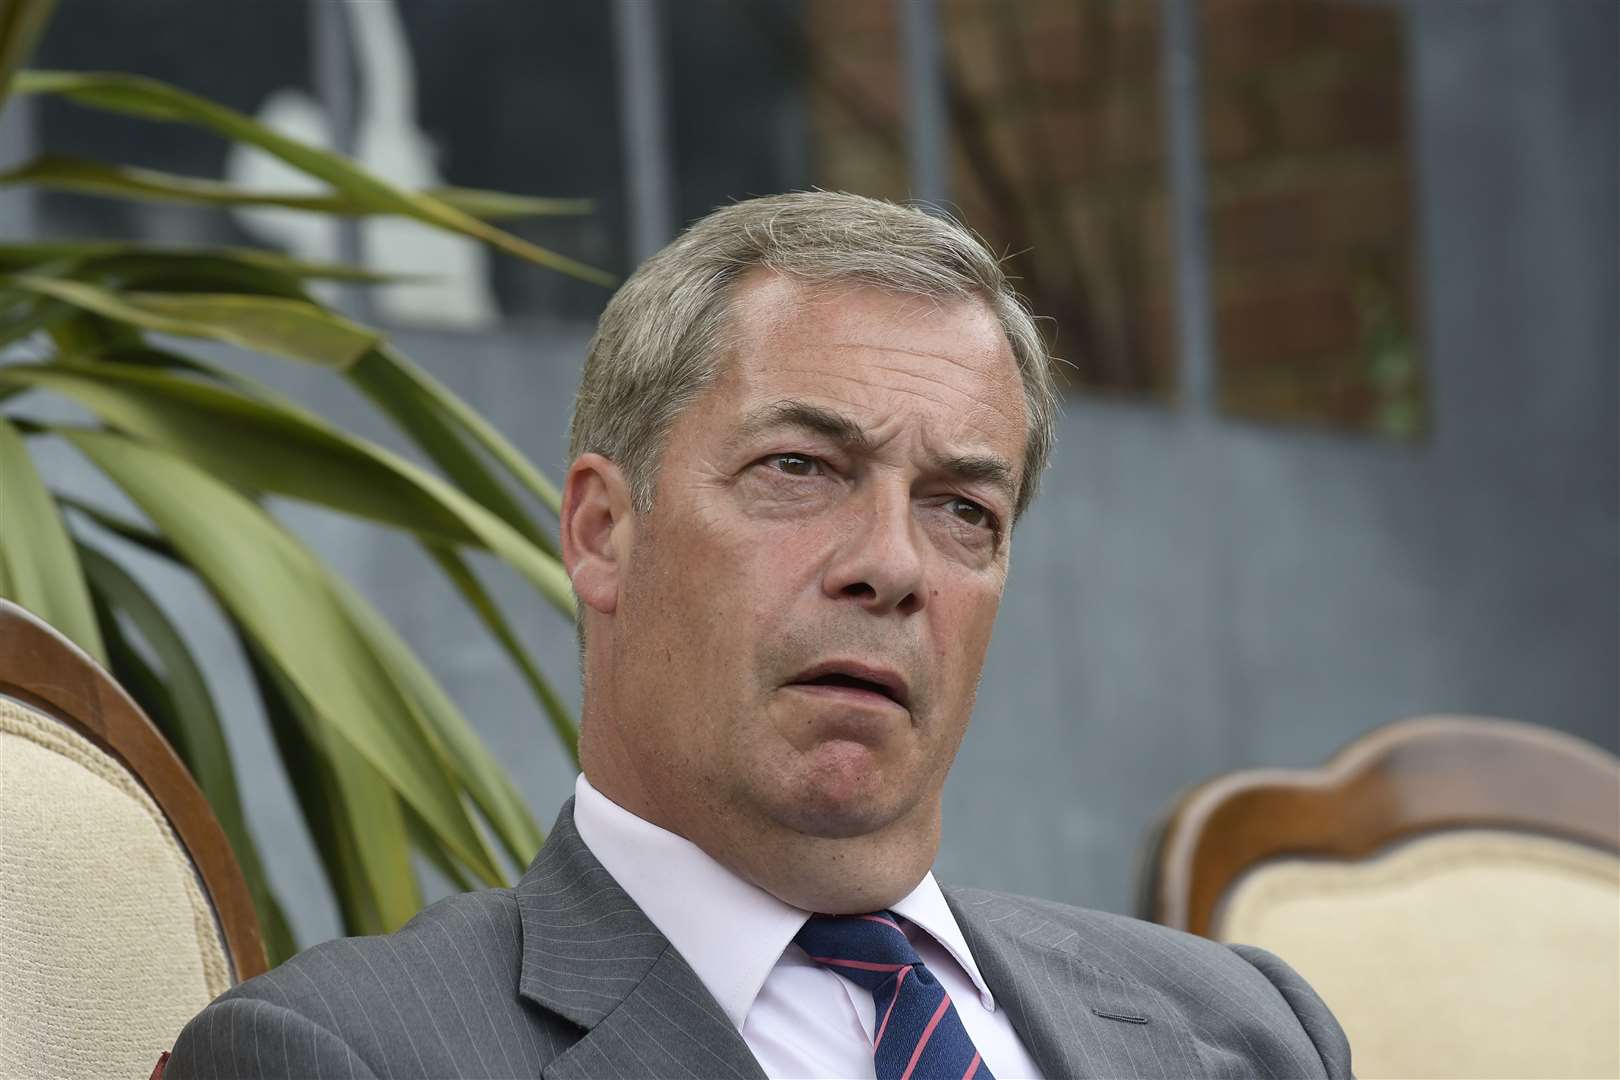 Nigel Farage is standing for the new Brexit Party as their leading candidate in the south east